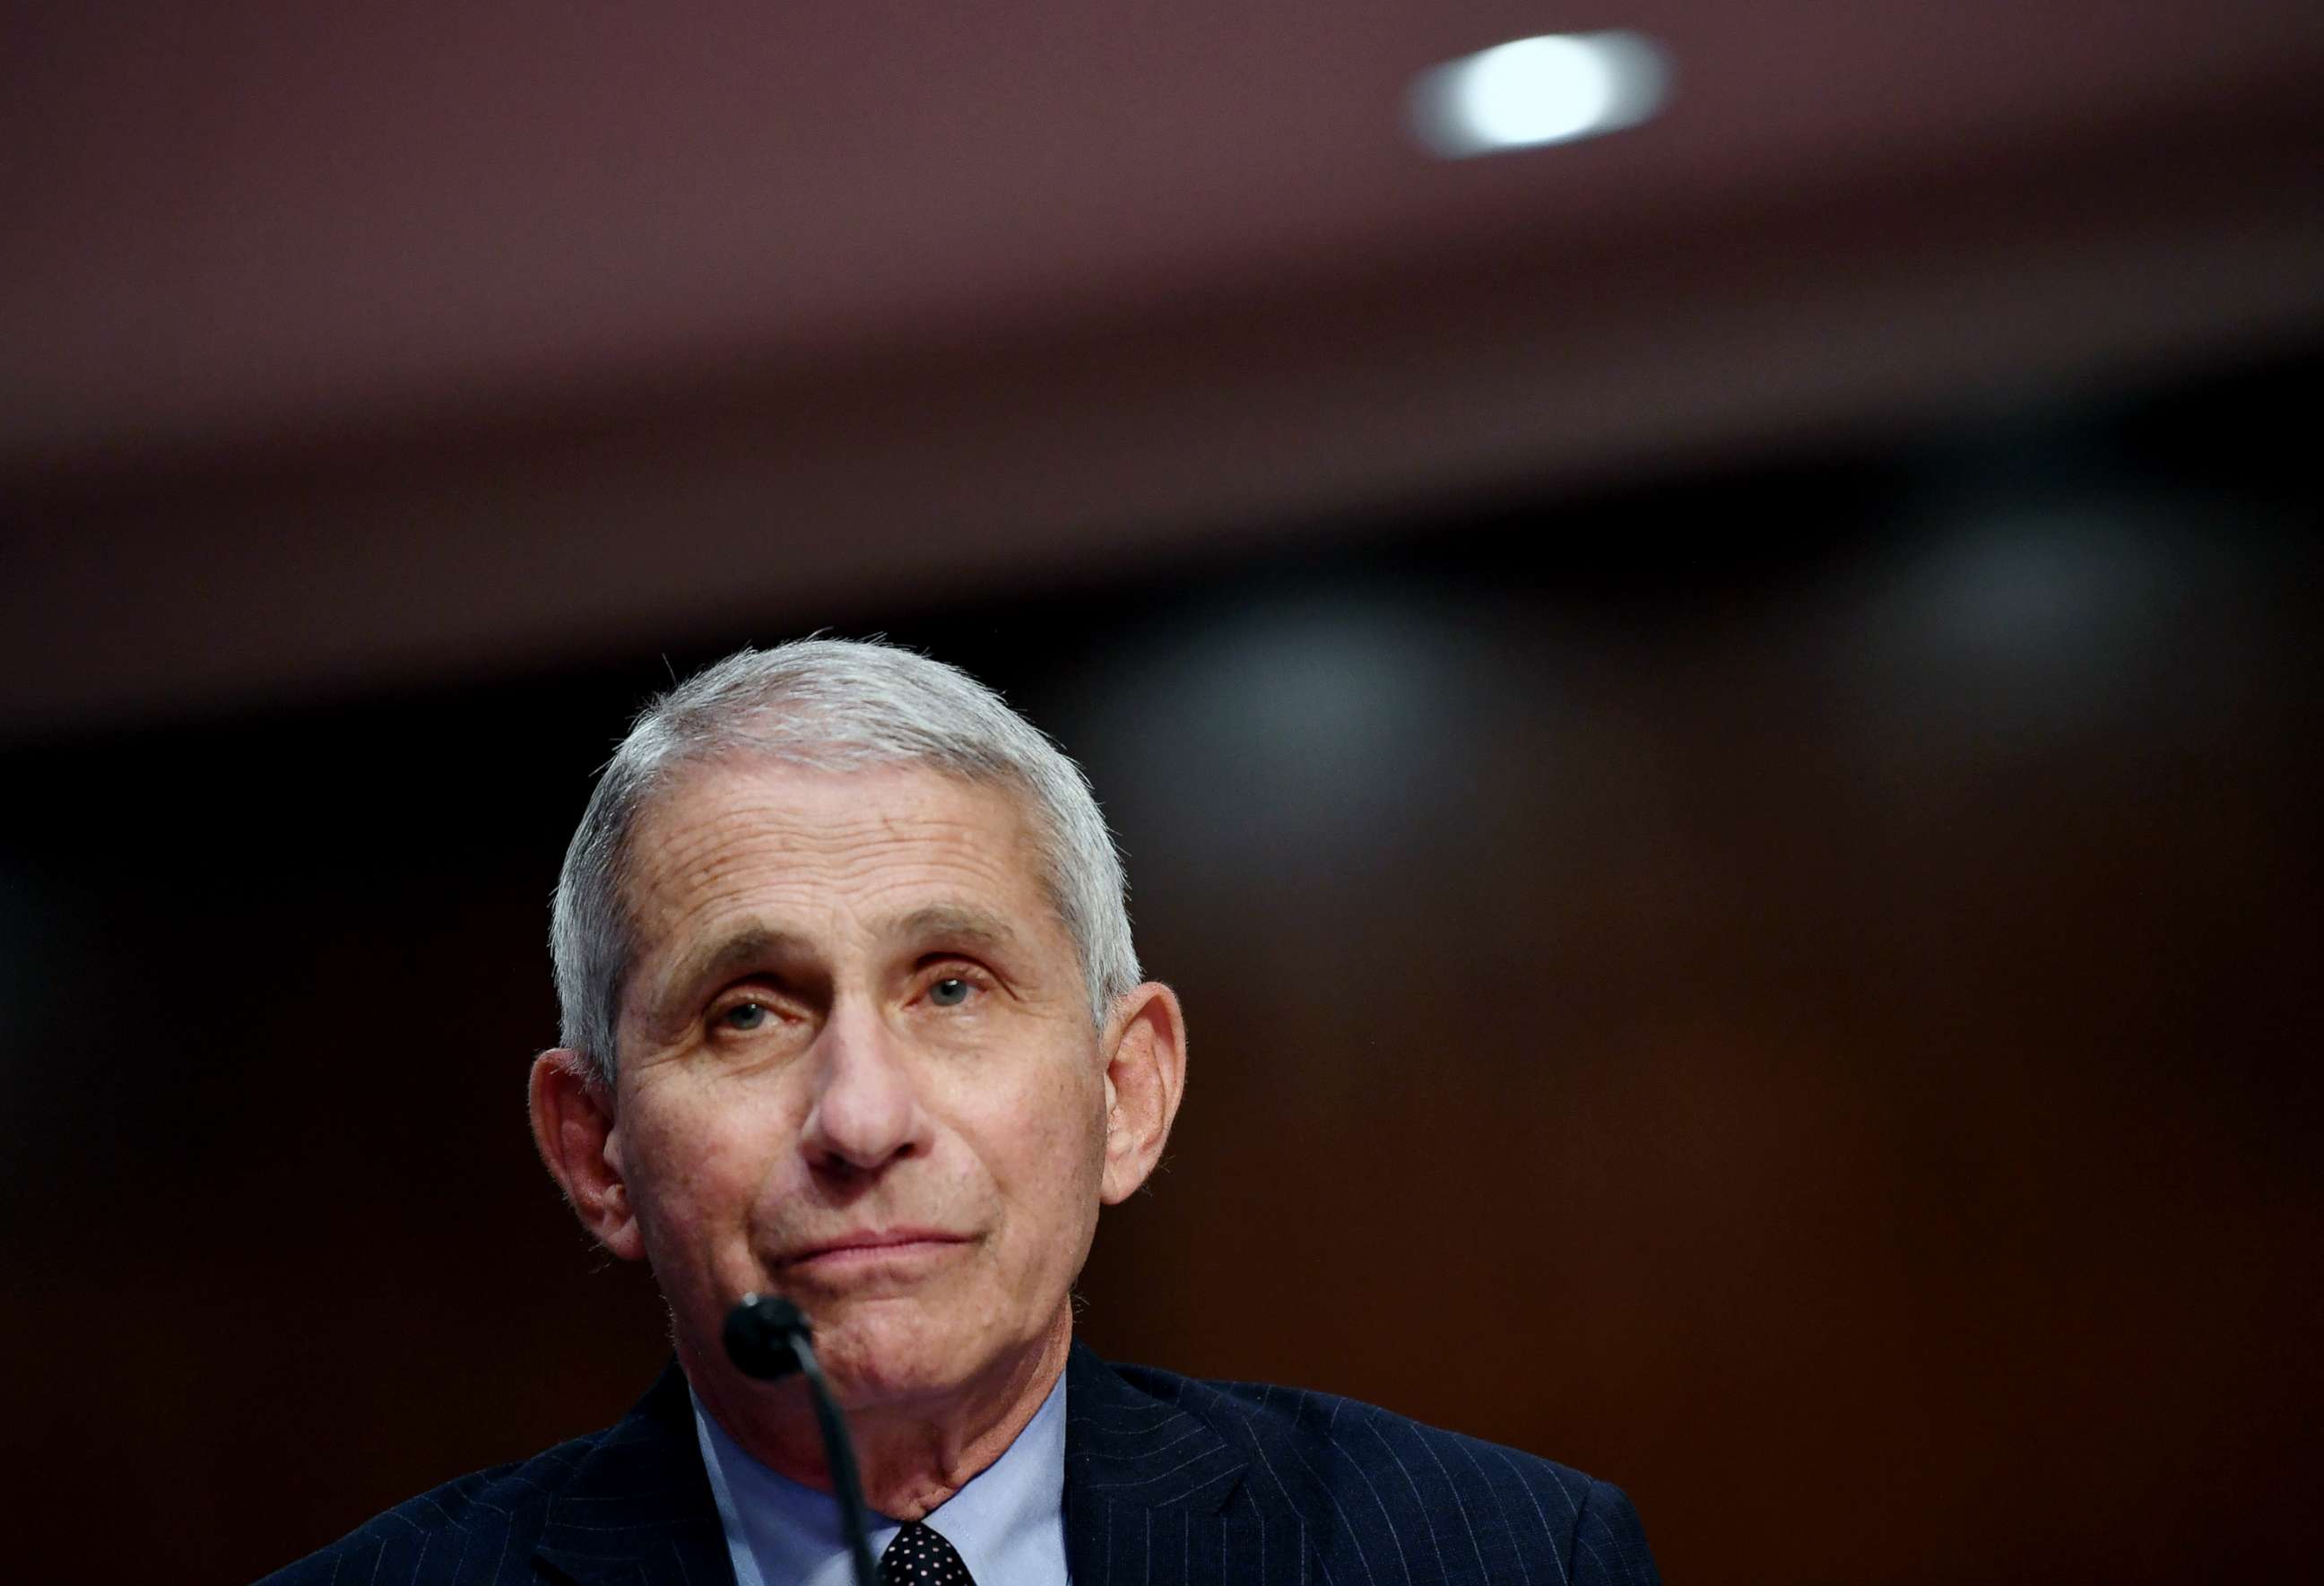 PHOTO: Dr. Anthony Fauci, director of the National Institute for Allergy and Infectious Diseases, testifies during a Senate Health, Education, Labor and Pensions (HELP) Committee hearing on Capitol Hill in Washington, June 30, 2020.